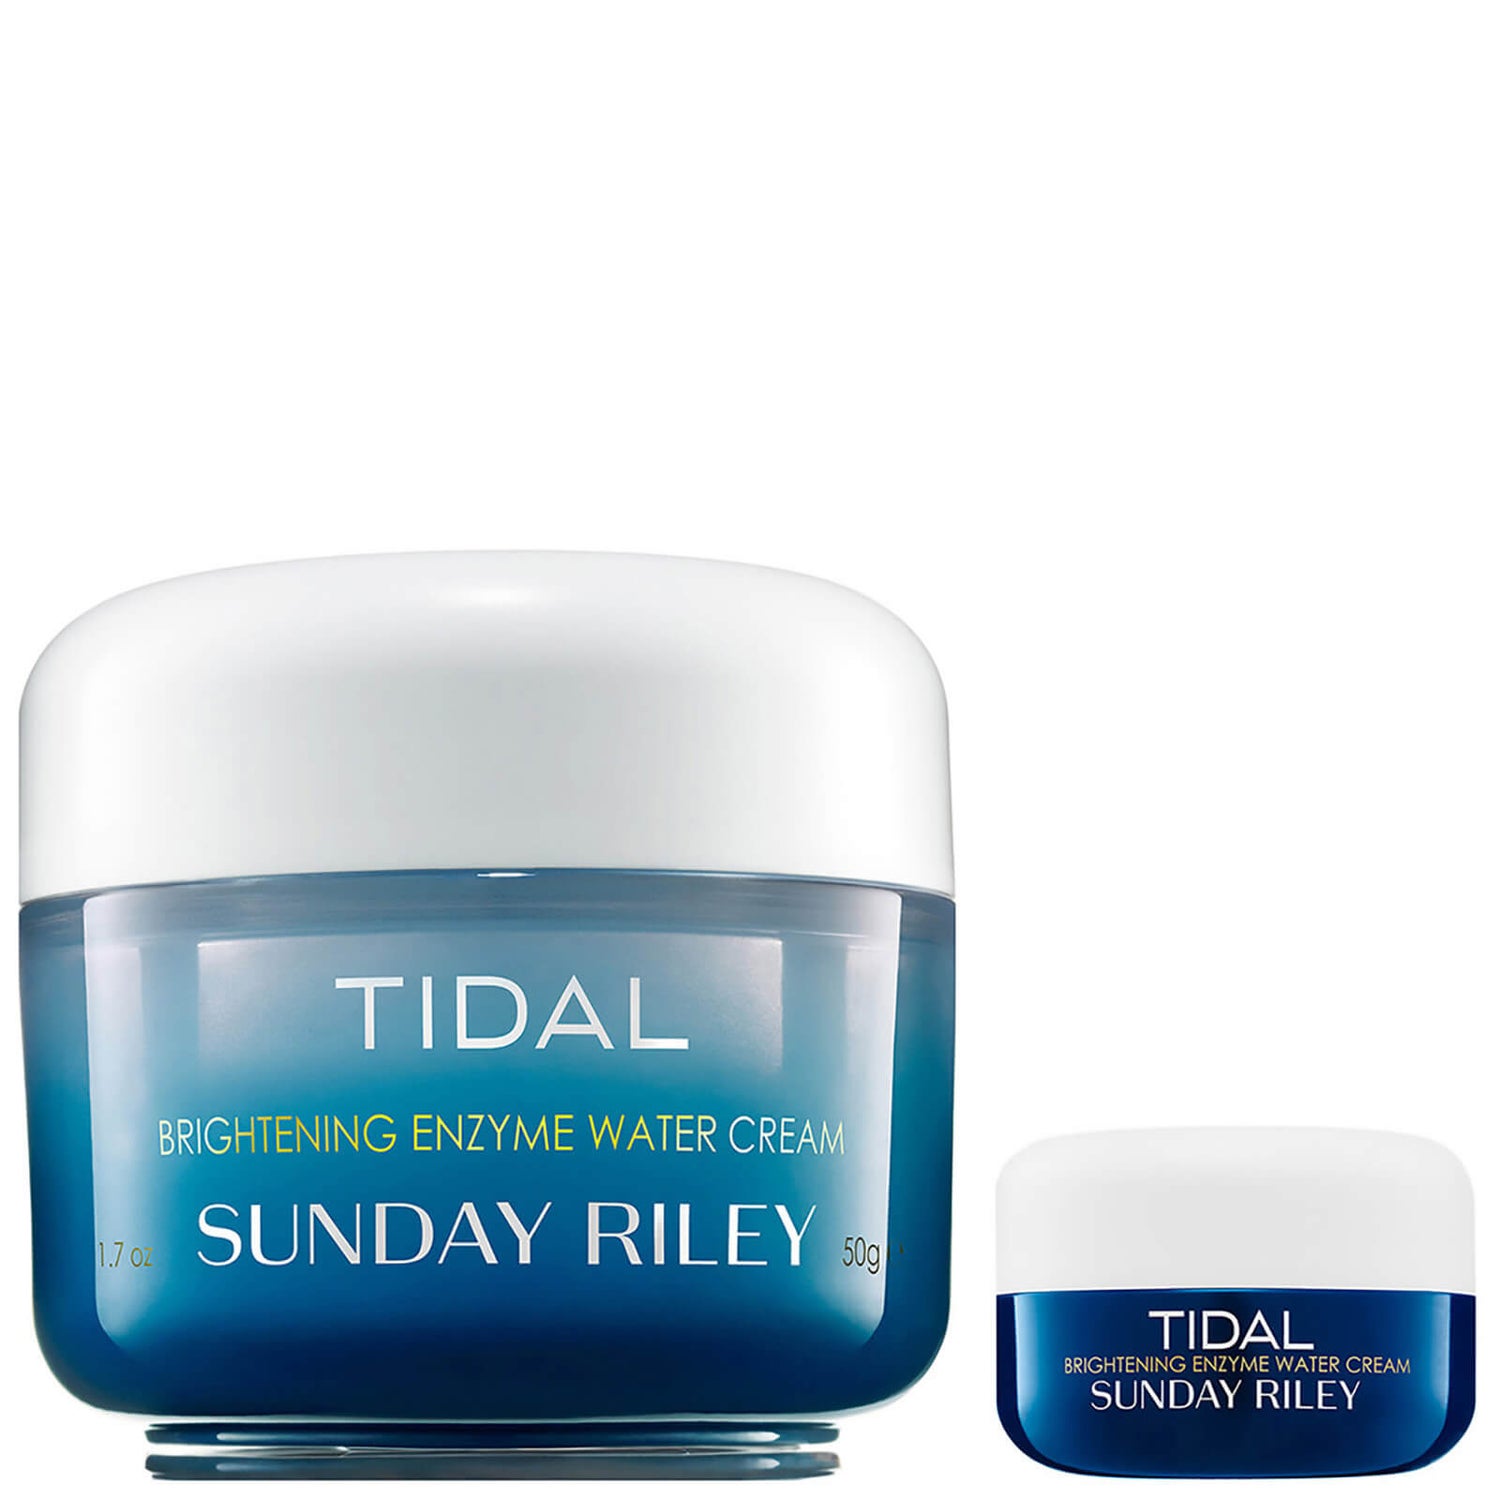 Sunday Riley Tidal Brightening Enzyme Water Cream Little and Large